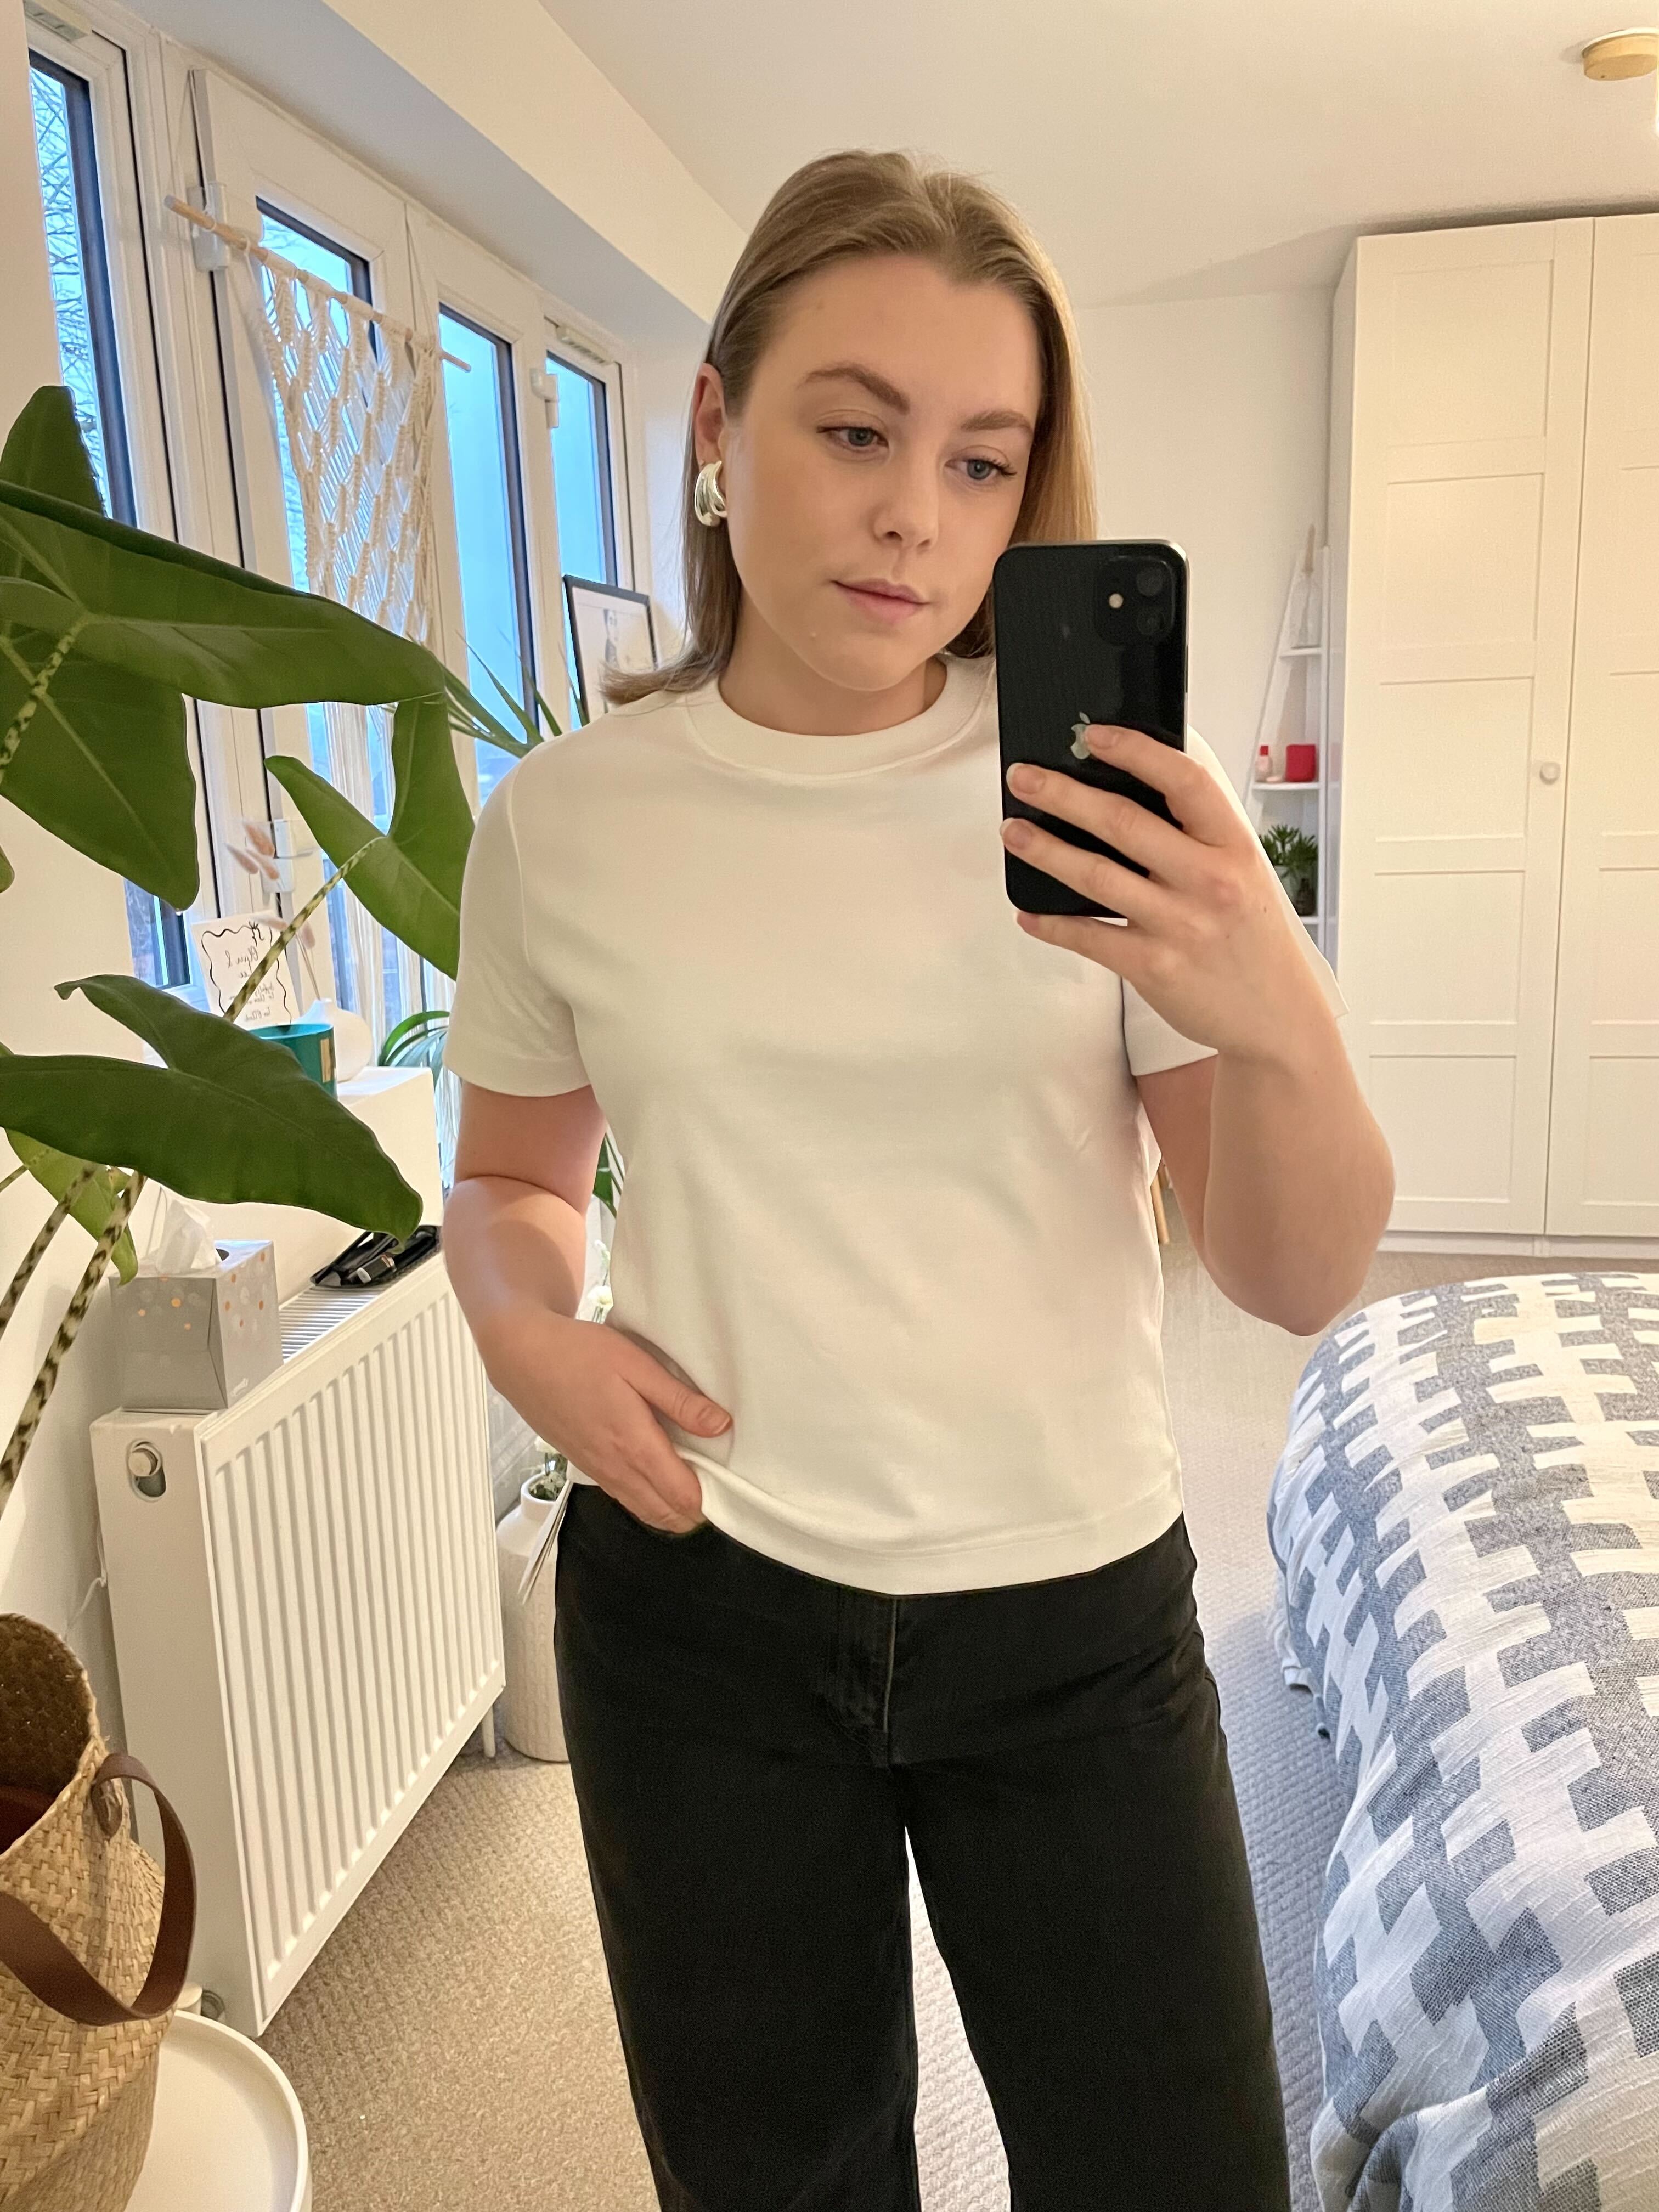 Florrie wears the COS Clean Cut T-Shirt and COS Arch Tapered Jeans